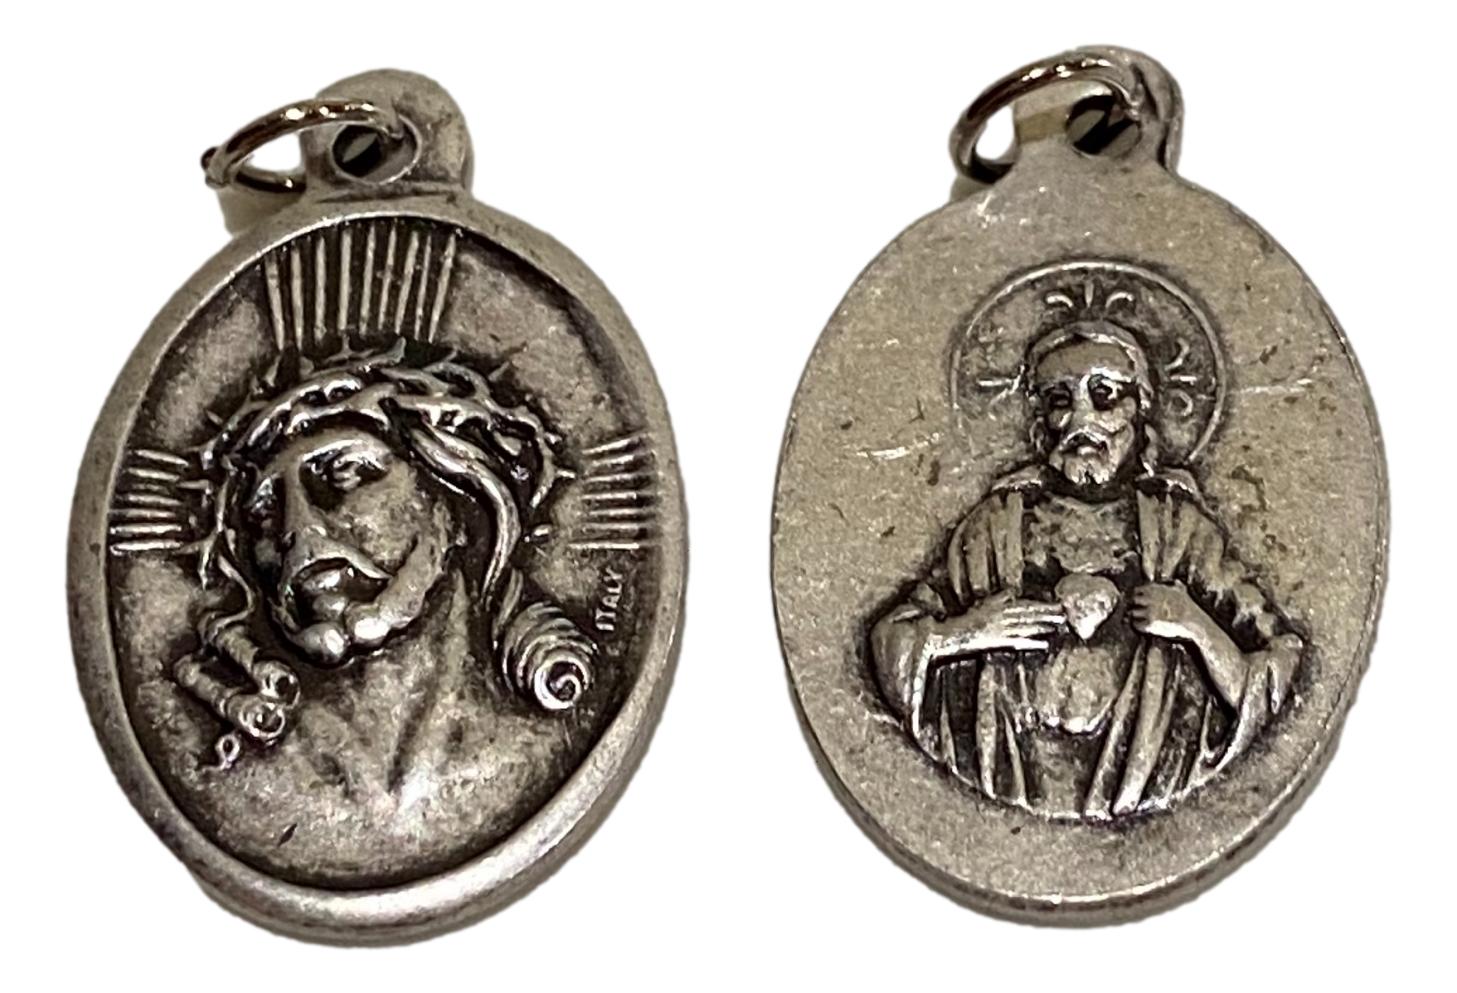 Medal Sacred Heart Of Jesus And Jesus Crown Of Thorns Italian Double-Sided Silver Oxidized Metal Alloy 1 inch - Ysleta Mission Gift Shop- VOTED El Paso's Best Gift Shop